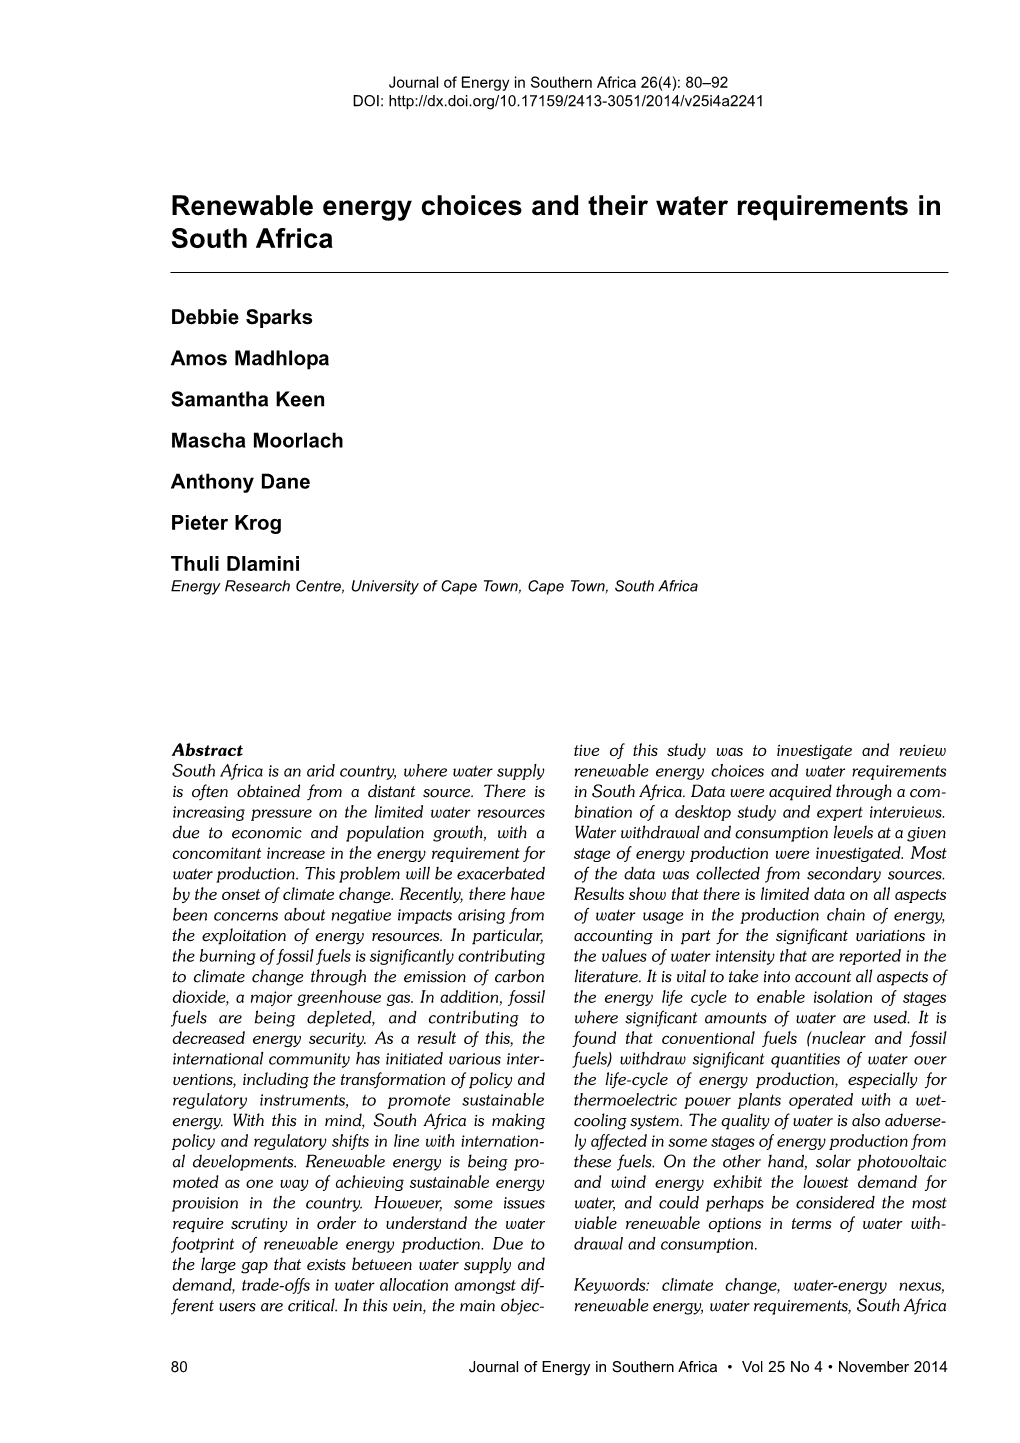 Renewable Energy Choices and Their Water Requirements in South Africa